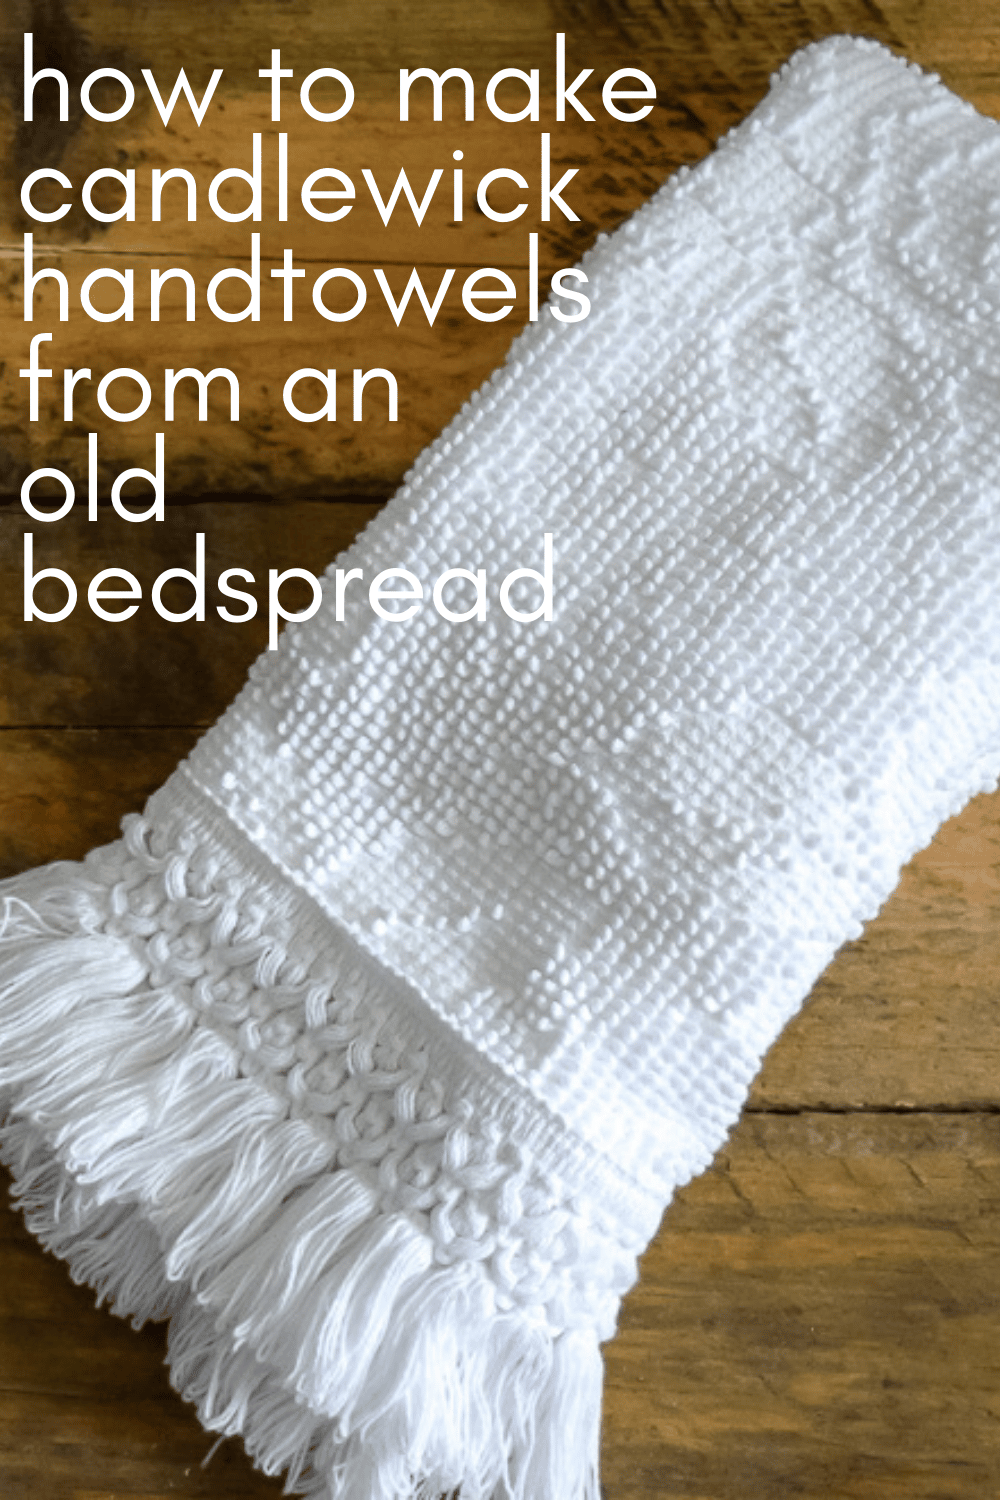 Candlewick Handtowel: a great upcycle project